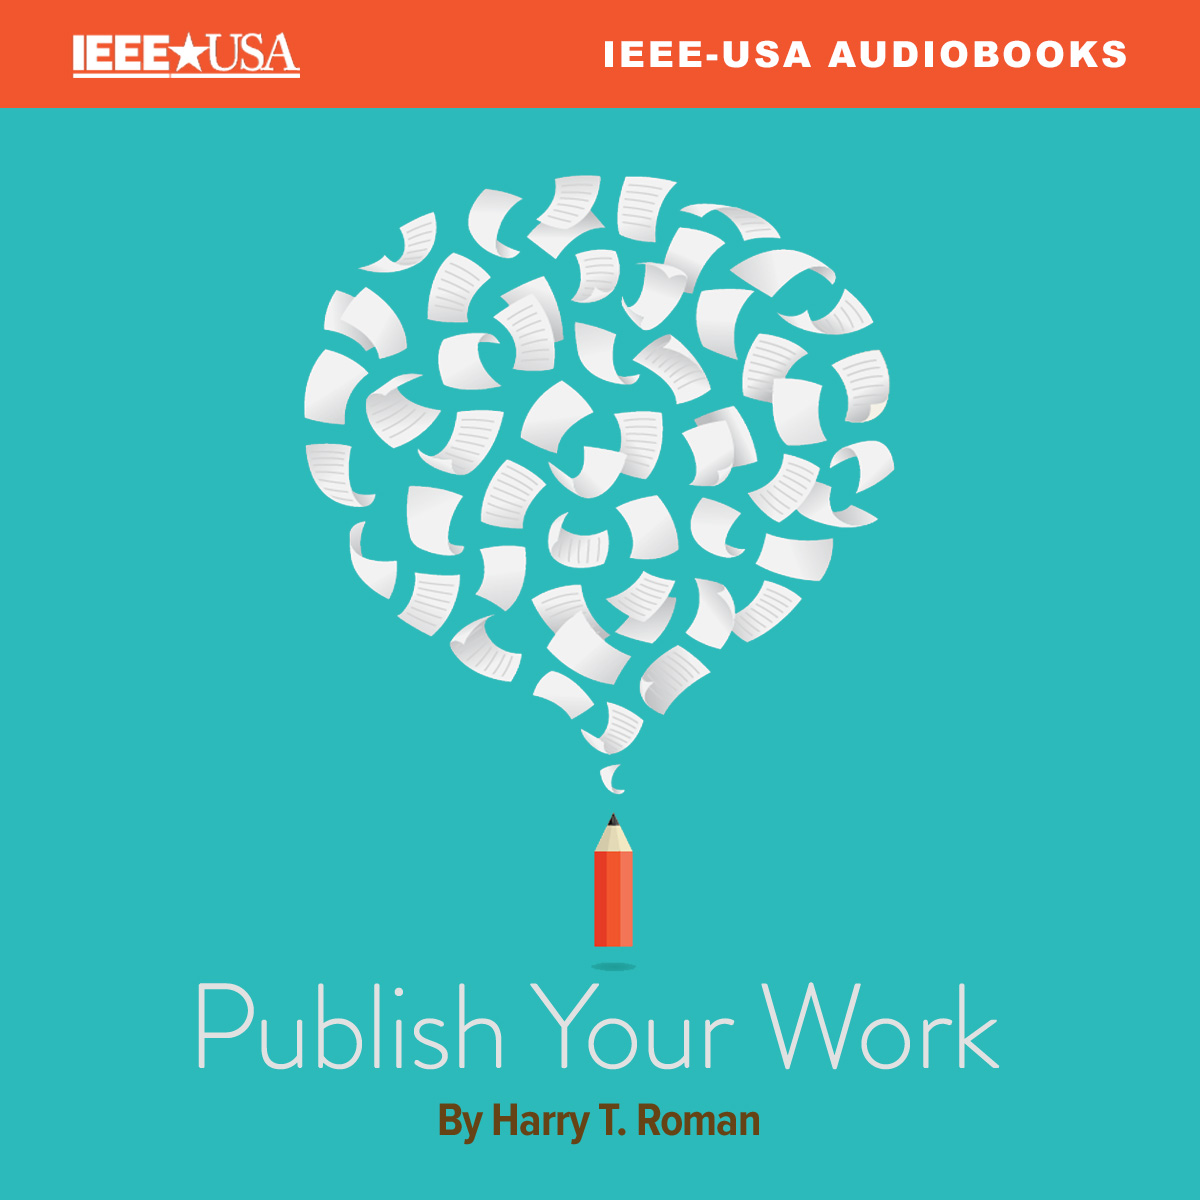 Audiobook: Publish Your Work